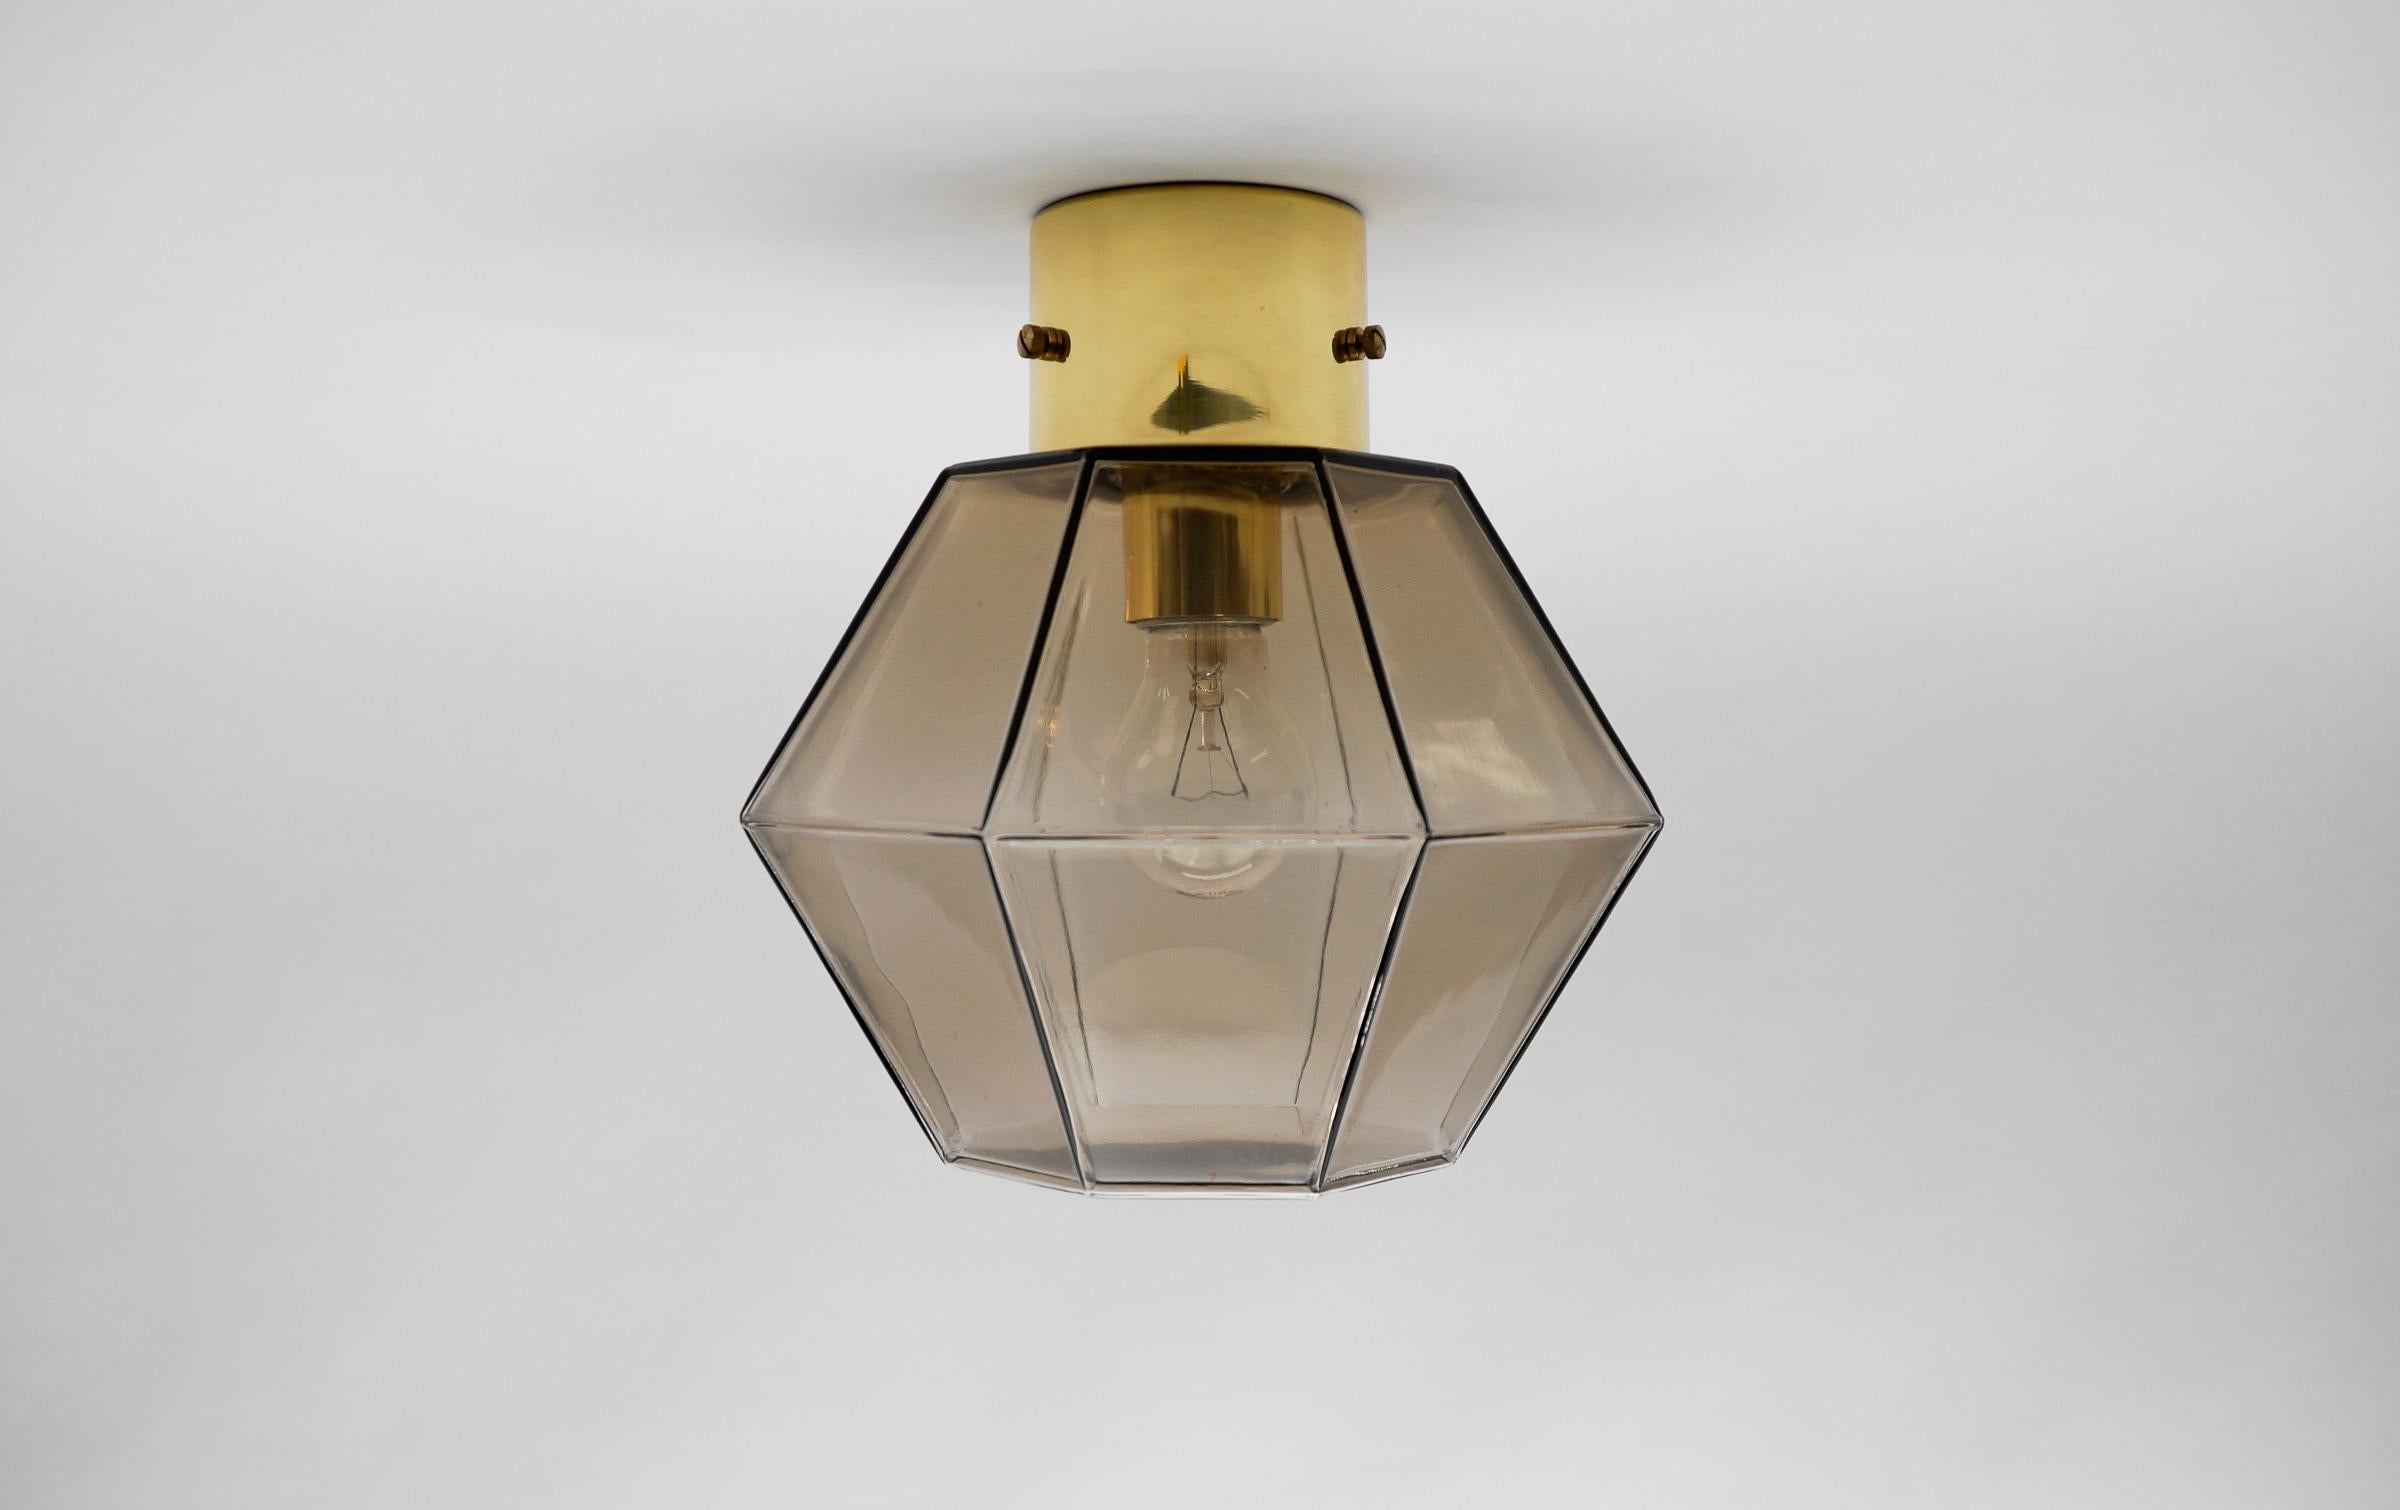 Black Octagonal Smoked Glass Flush Mount by Limburg, Germany 1960s

Dimensions
Height: 10.23 in. (26 cm)
Diameter: 10.23 in. (26 cm)

The fixture need 1 x E27 standard bulb with 60W max.

Light bulbs are not included.
It is possible to install this